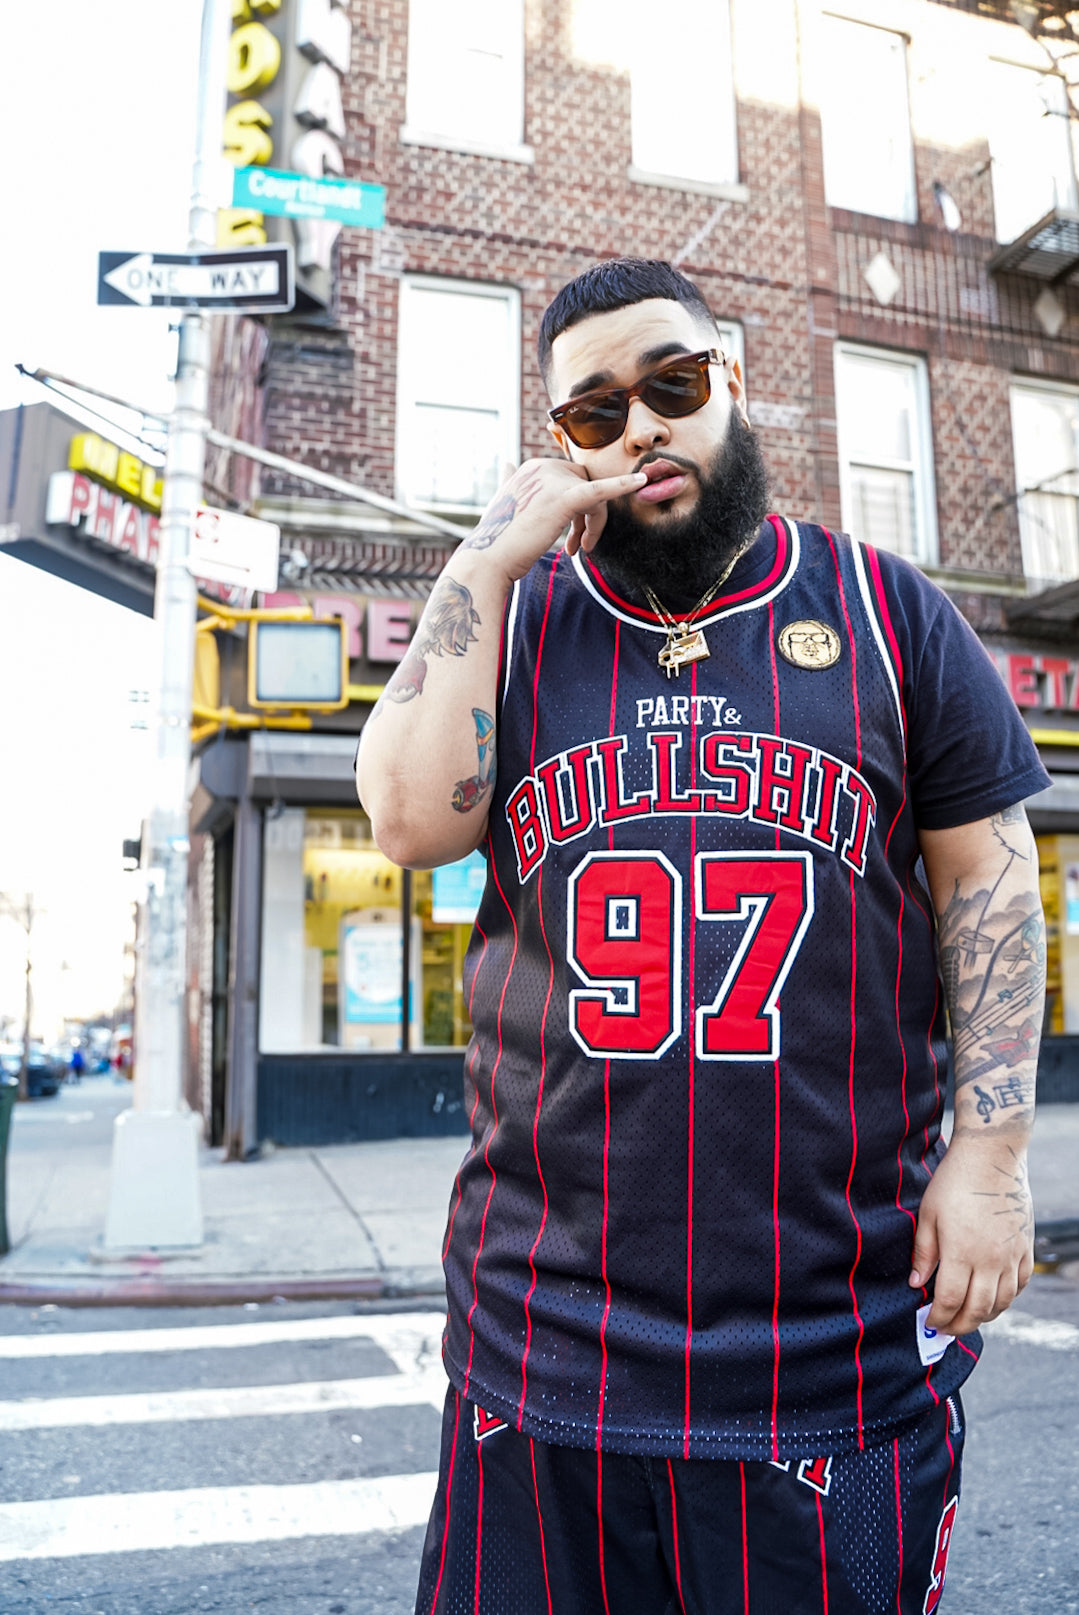 PARTY AND BULLSH*T Pinstripe Jersey